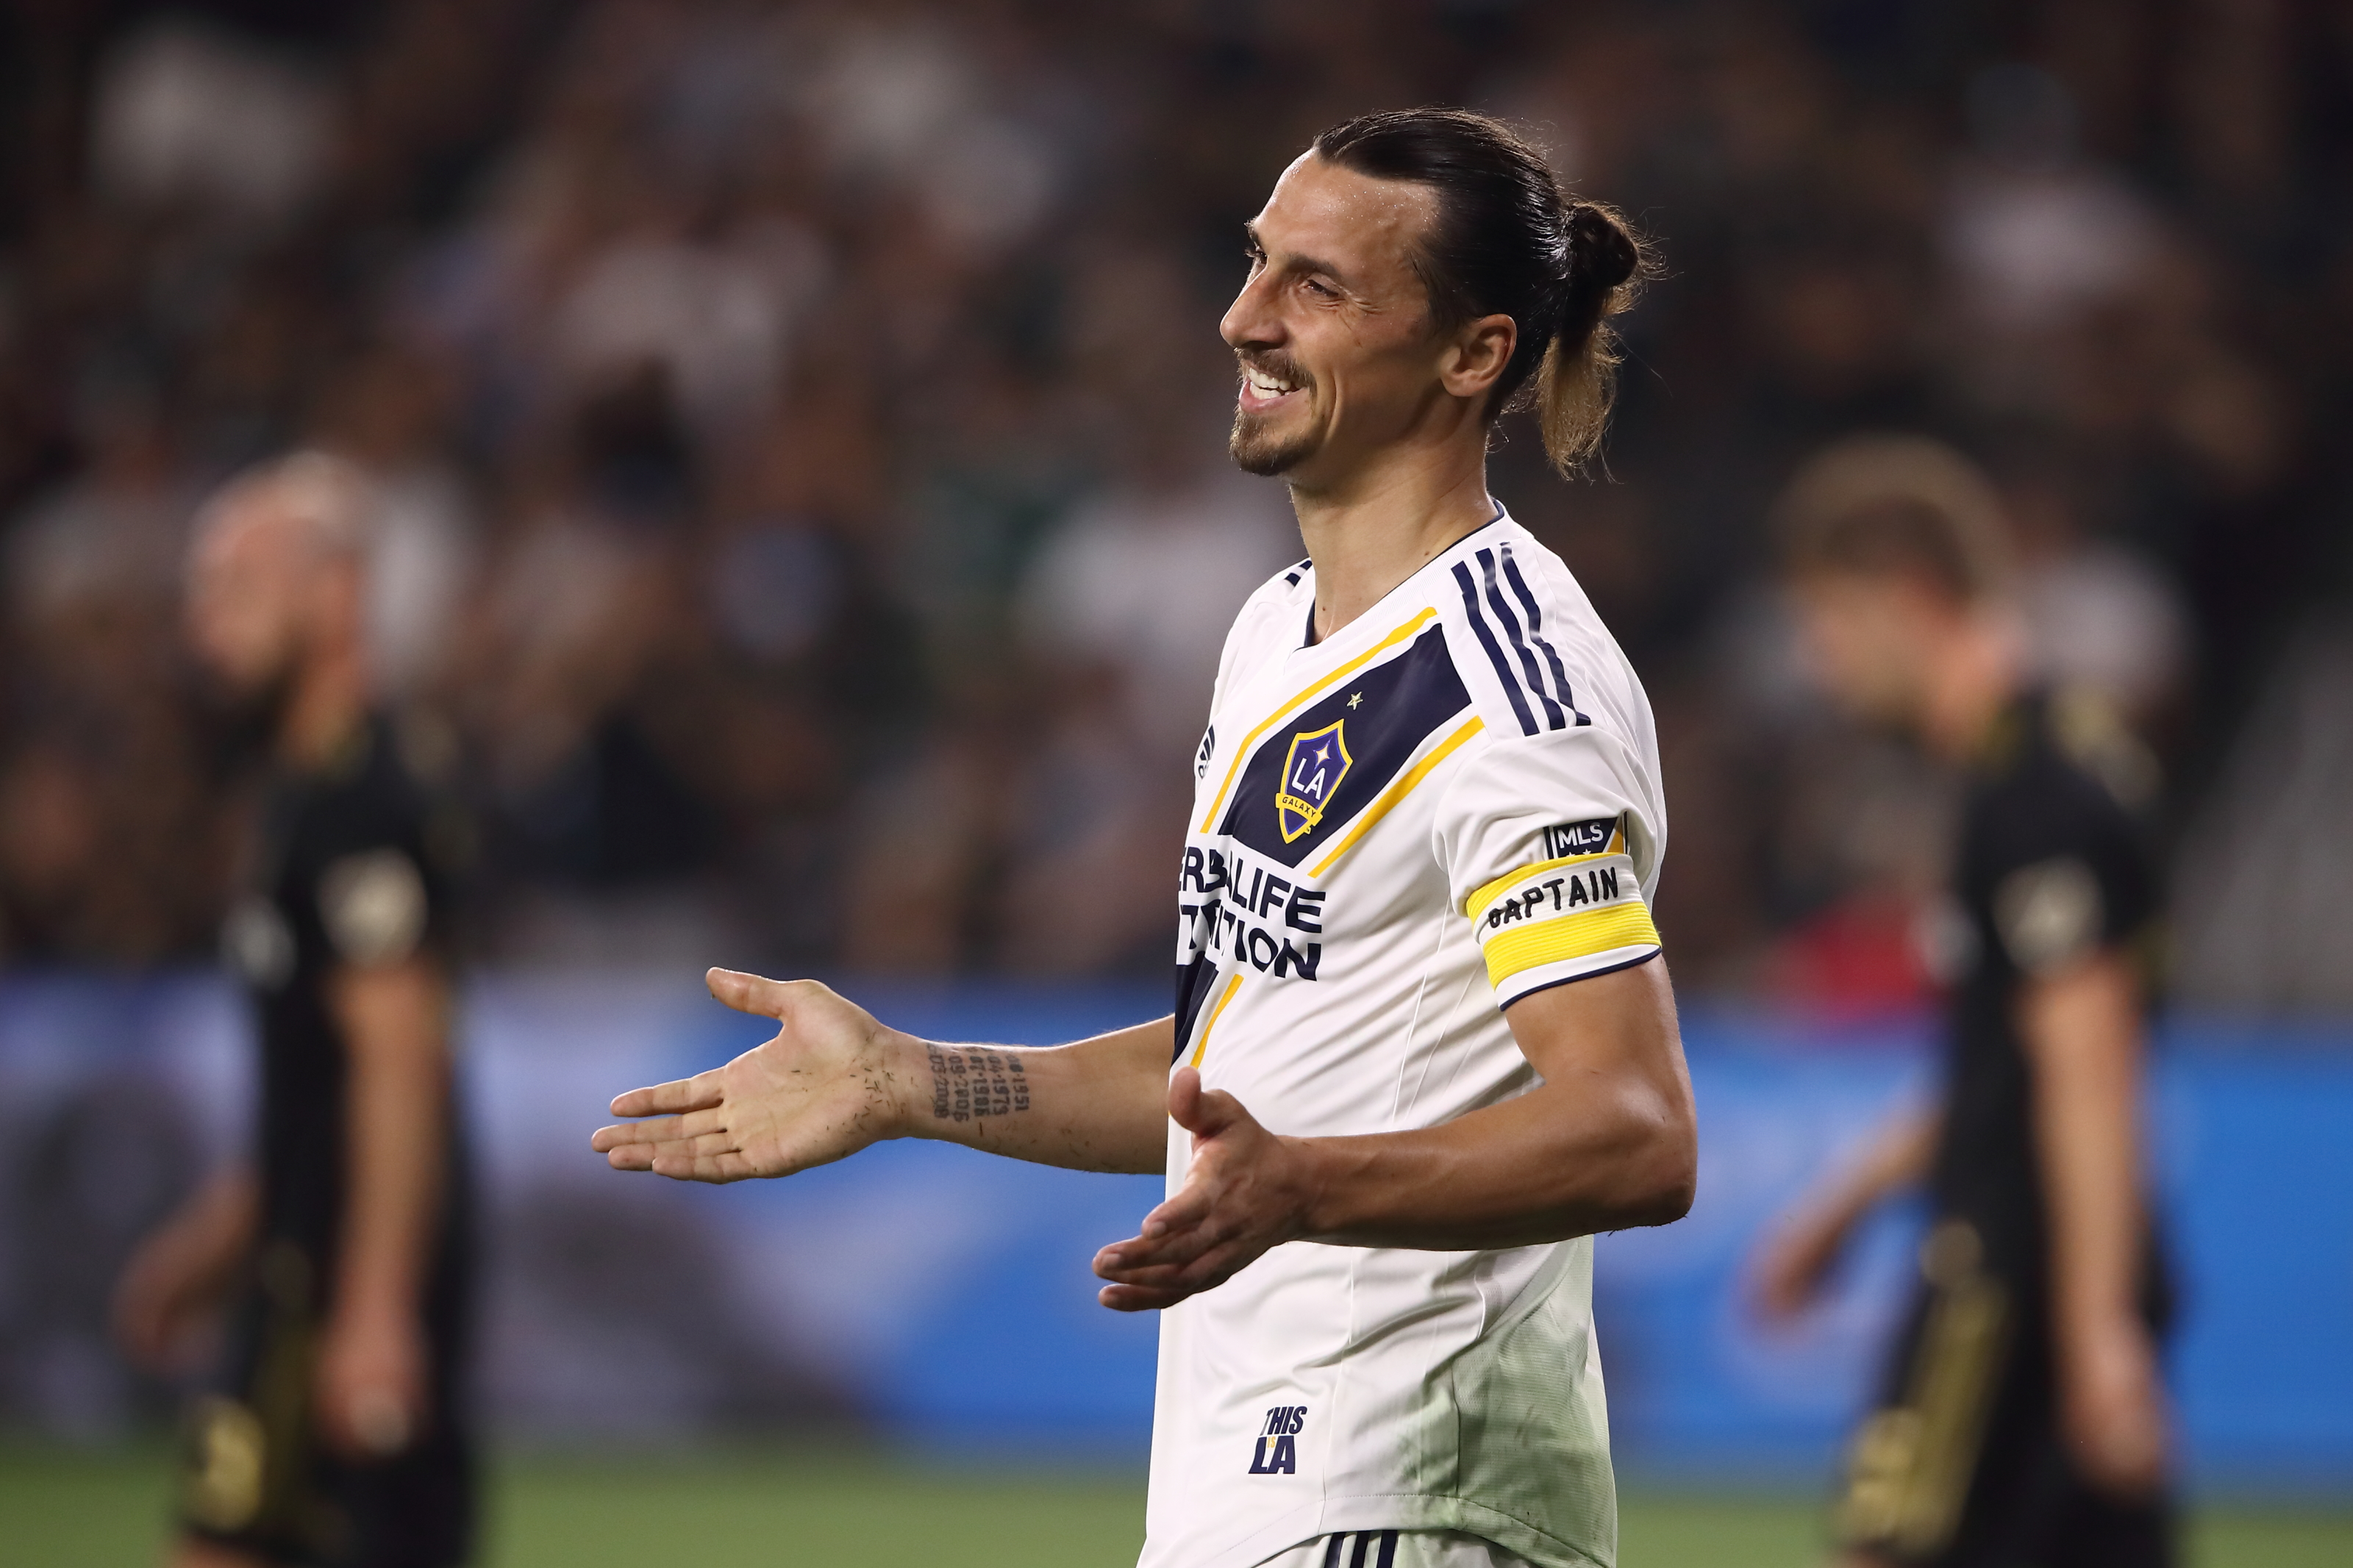 It's an Angeleno thing: How LA Galaxy and Los Angeles FC co-exist